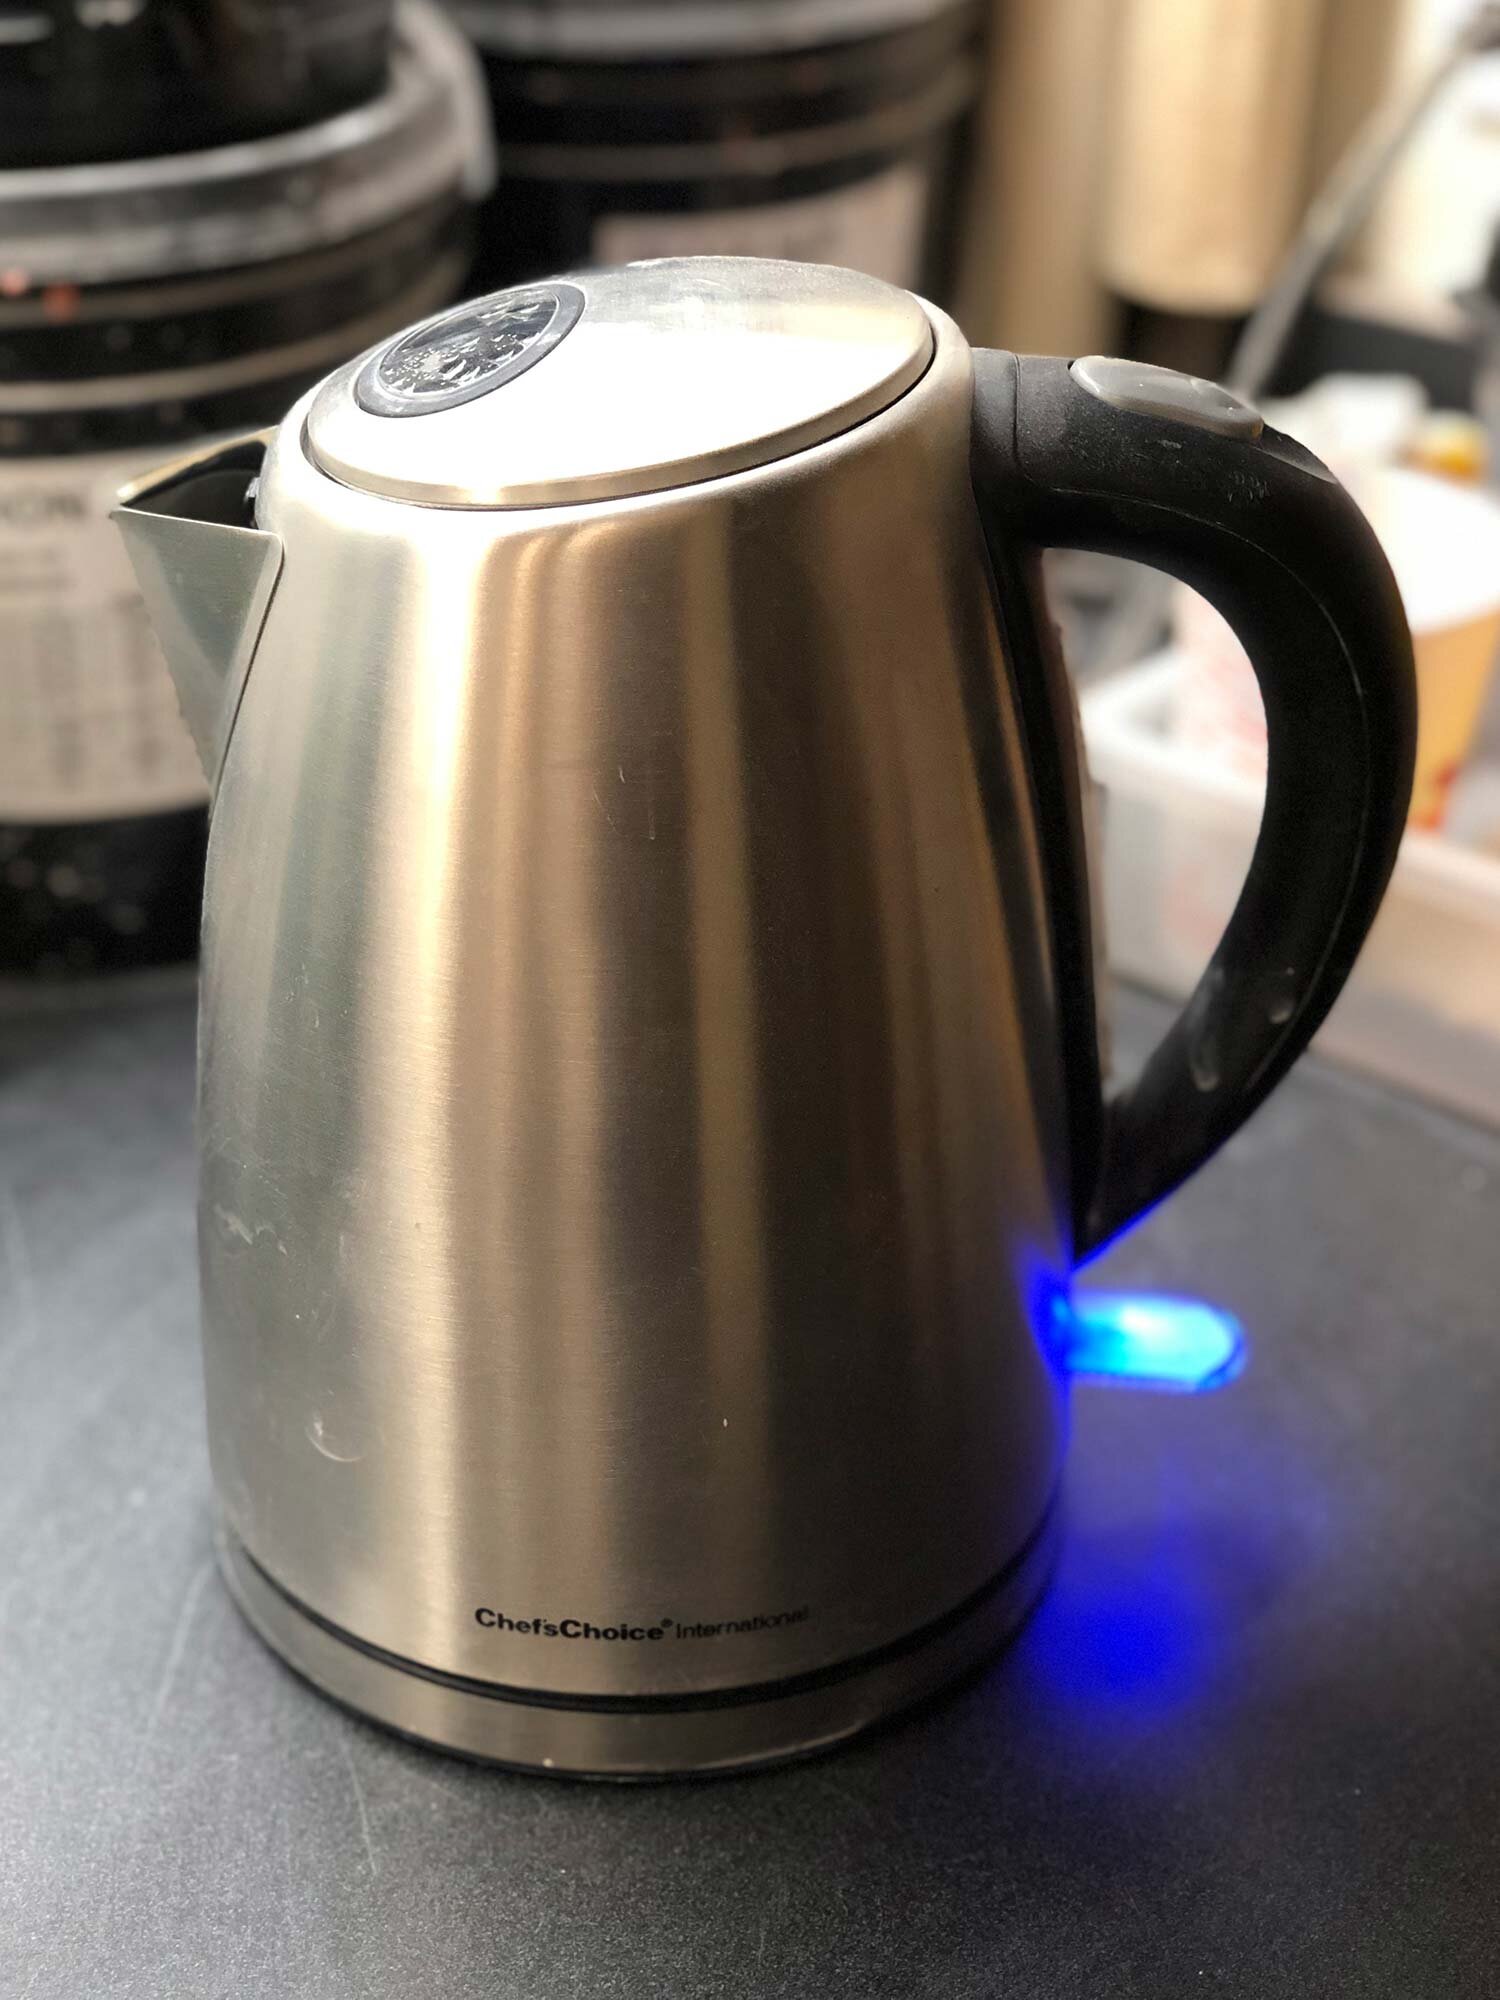 The kettle with the blue "on" light